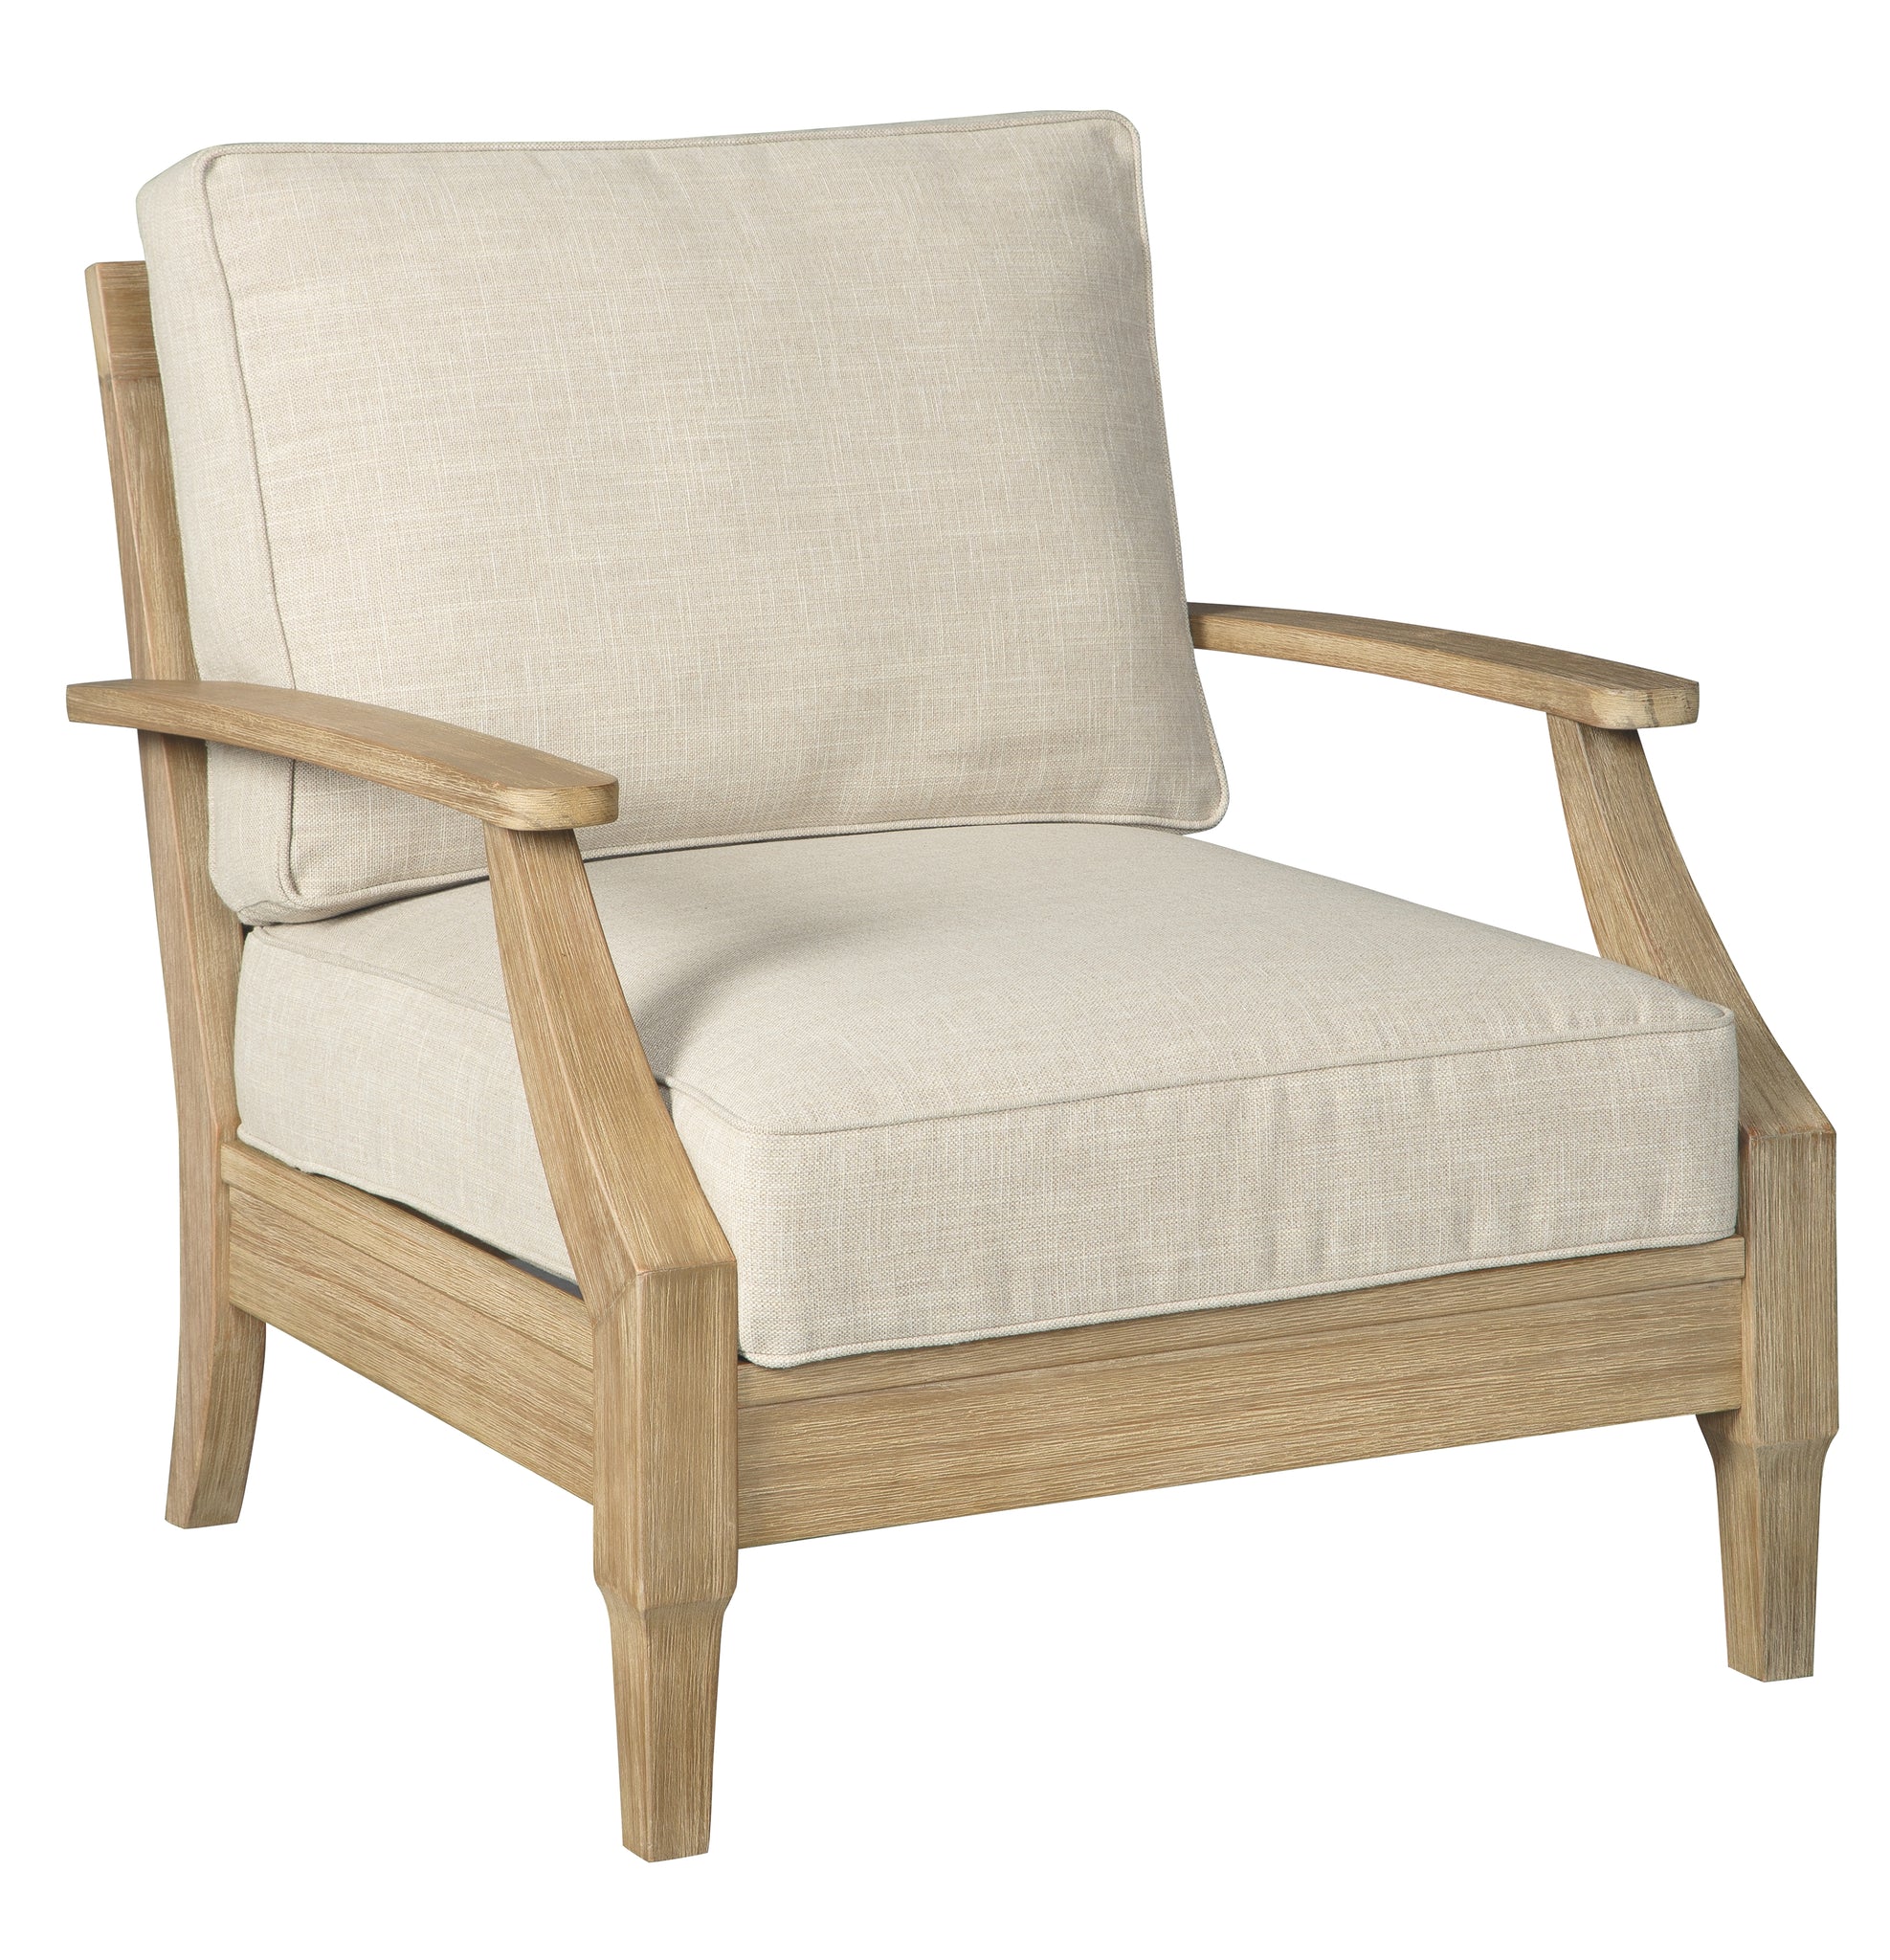 Clare View Signature Design by Ashley Lounge Chair